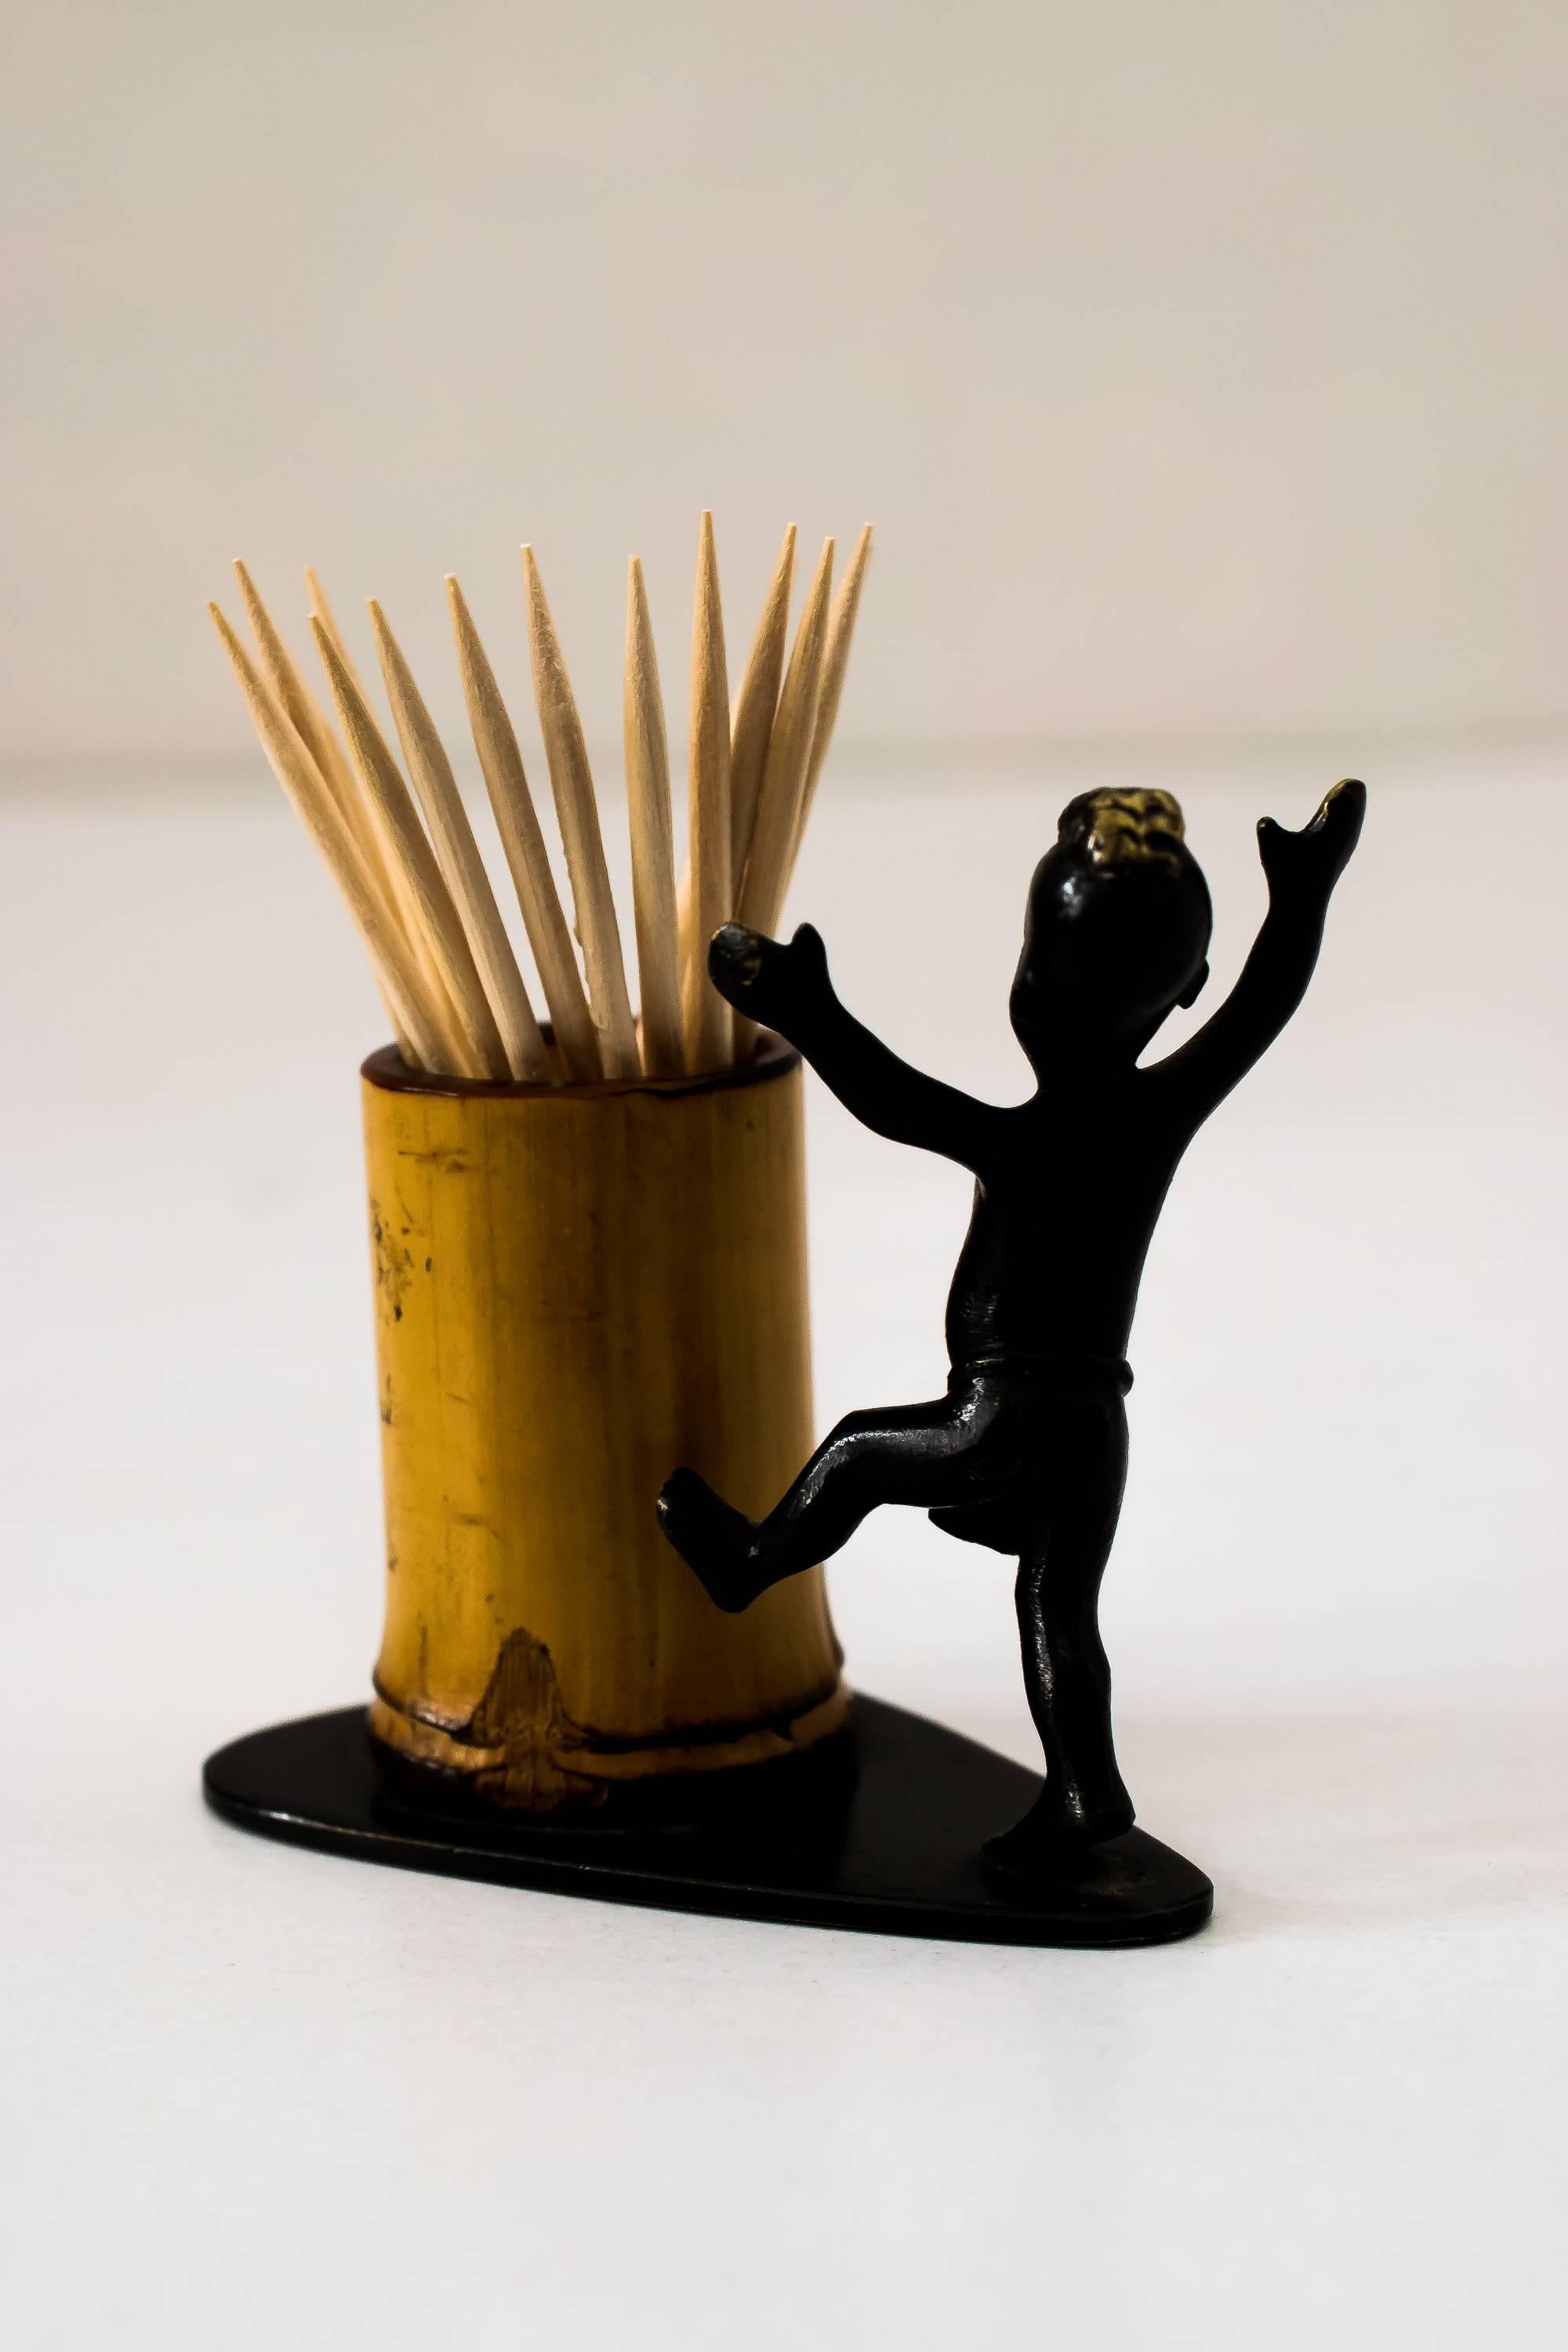 Toothpick holder with African boy by Richard Rohac
Original condition.